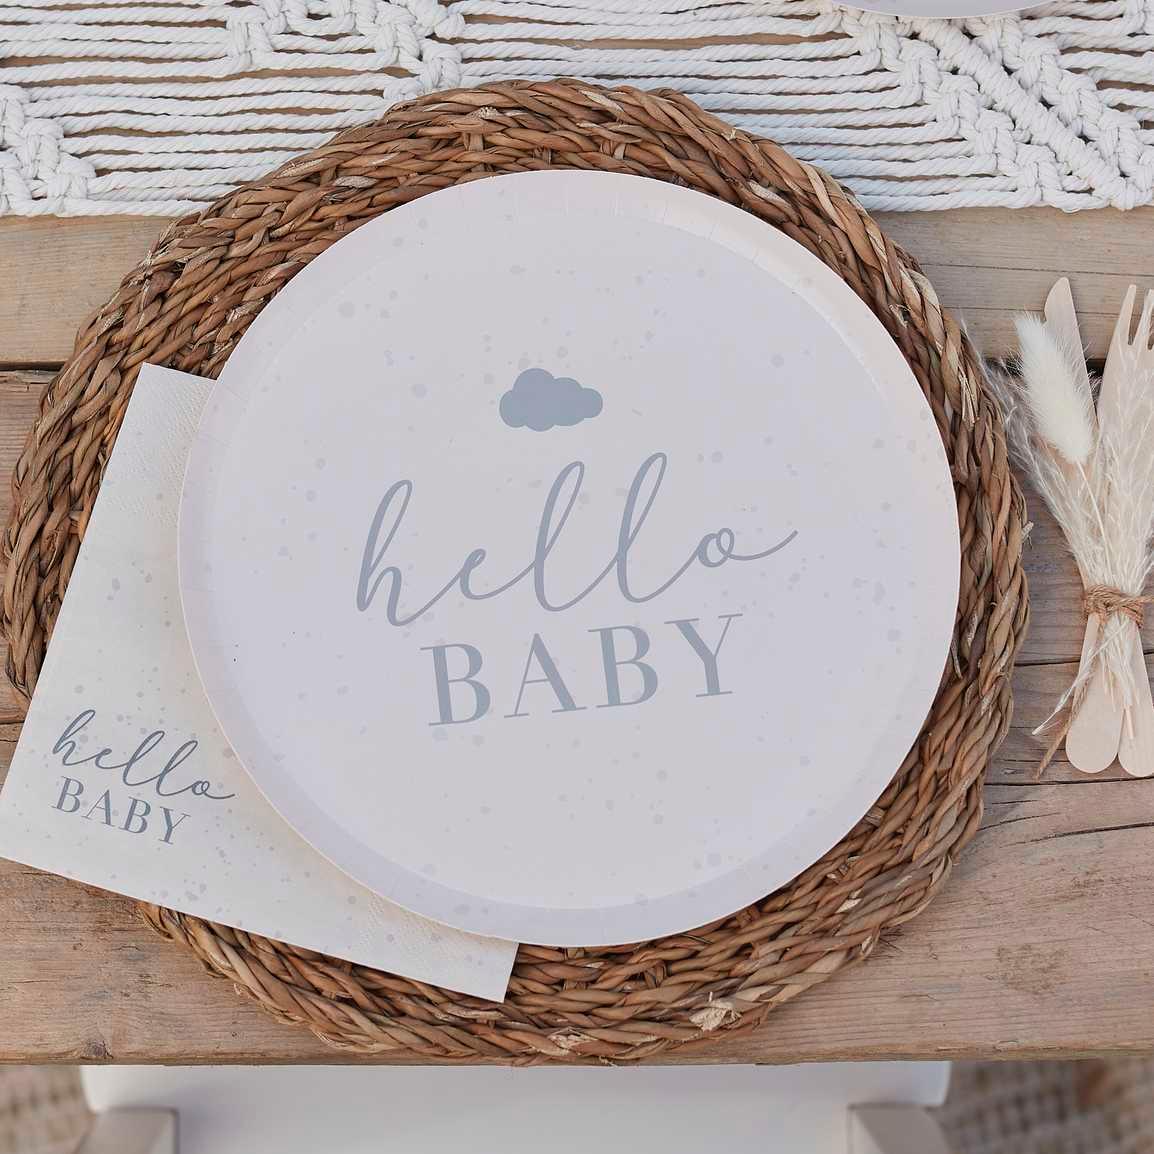 Hello Baby Neutral Baby Shower Plates 8pk - The Party Room